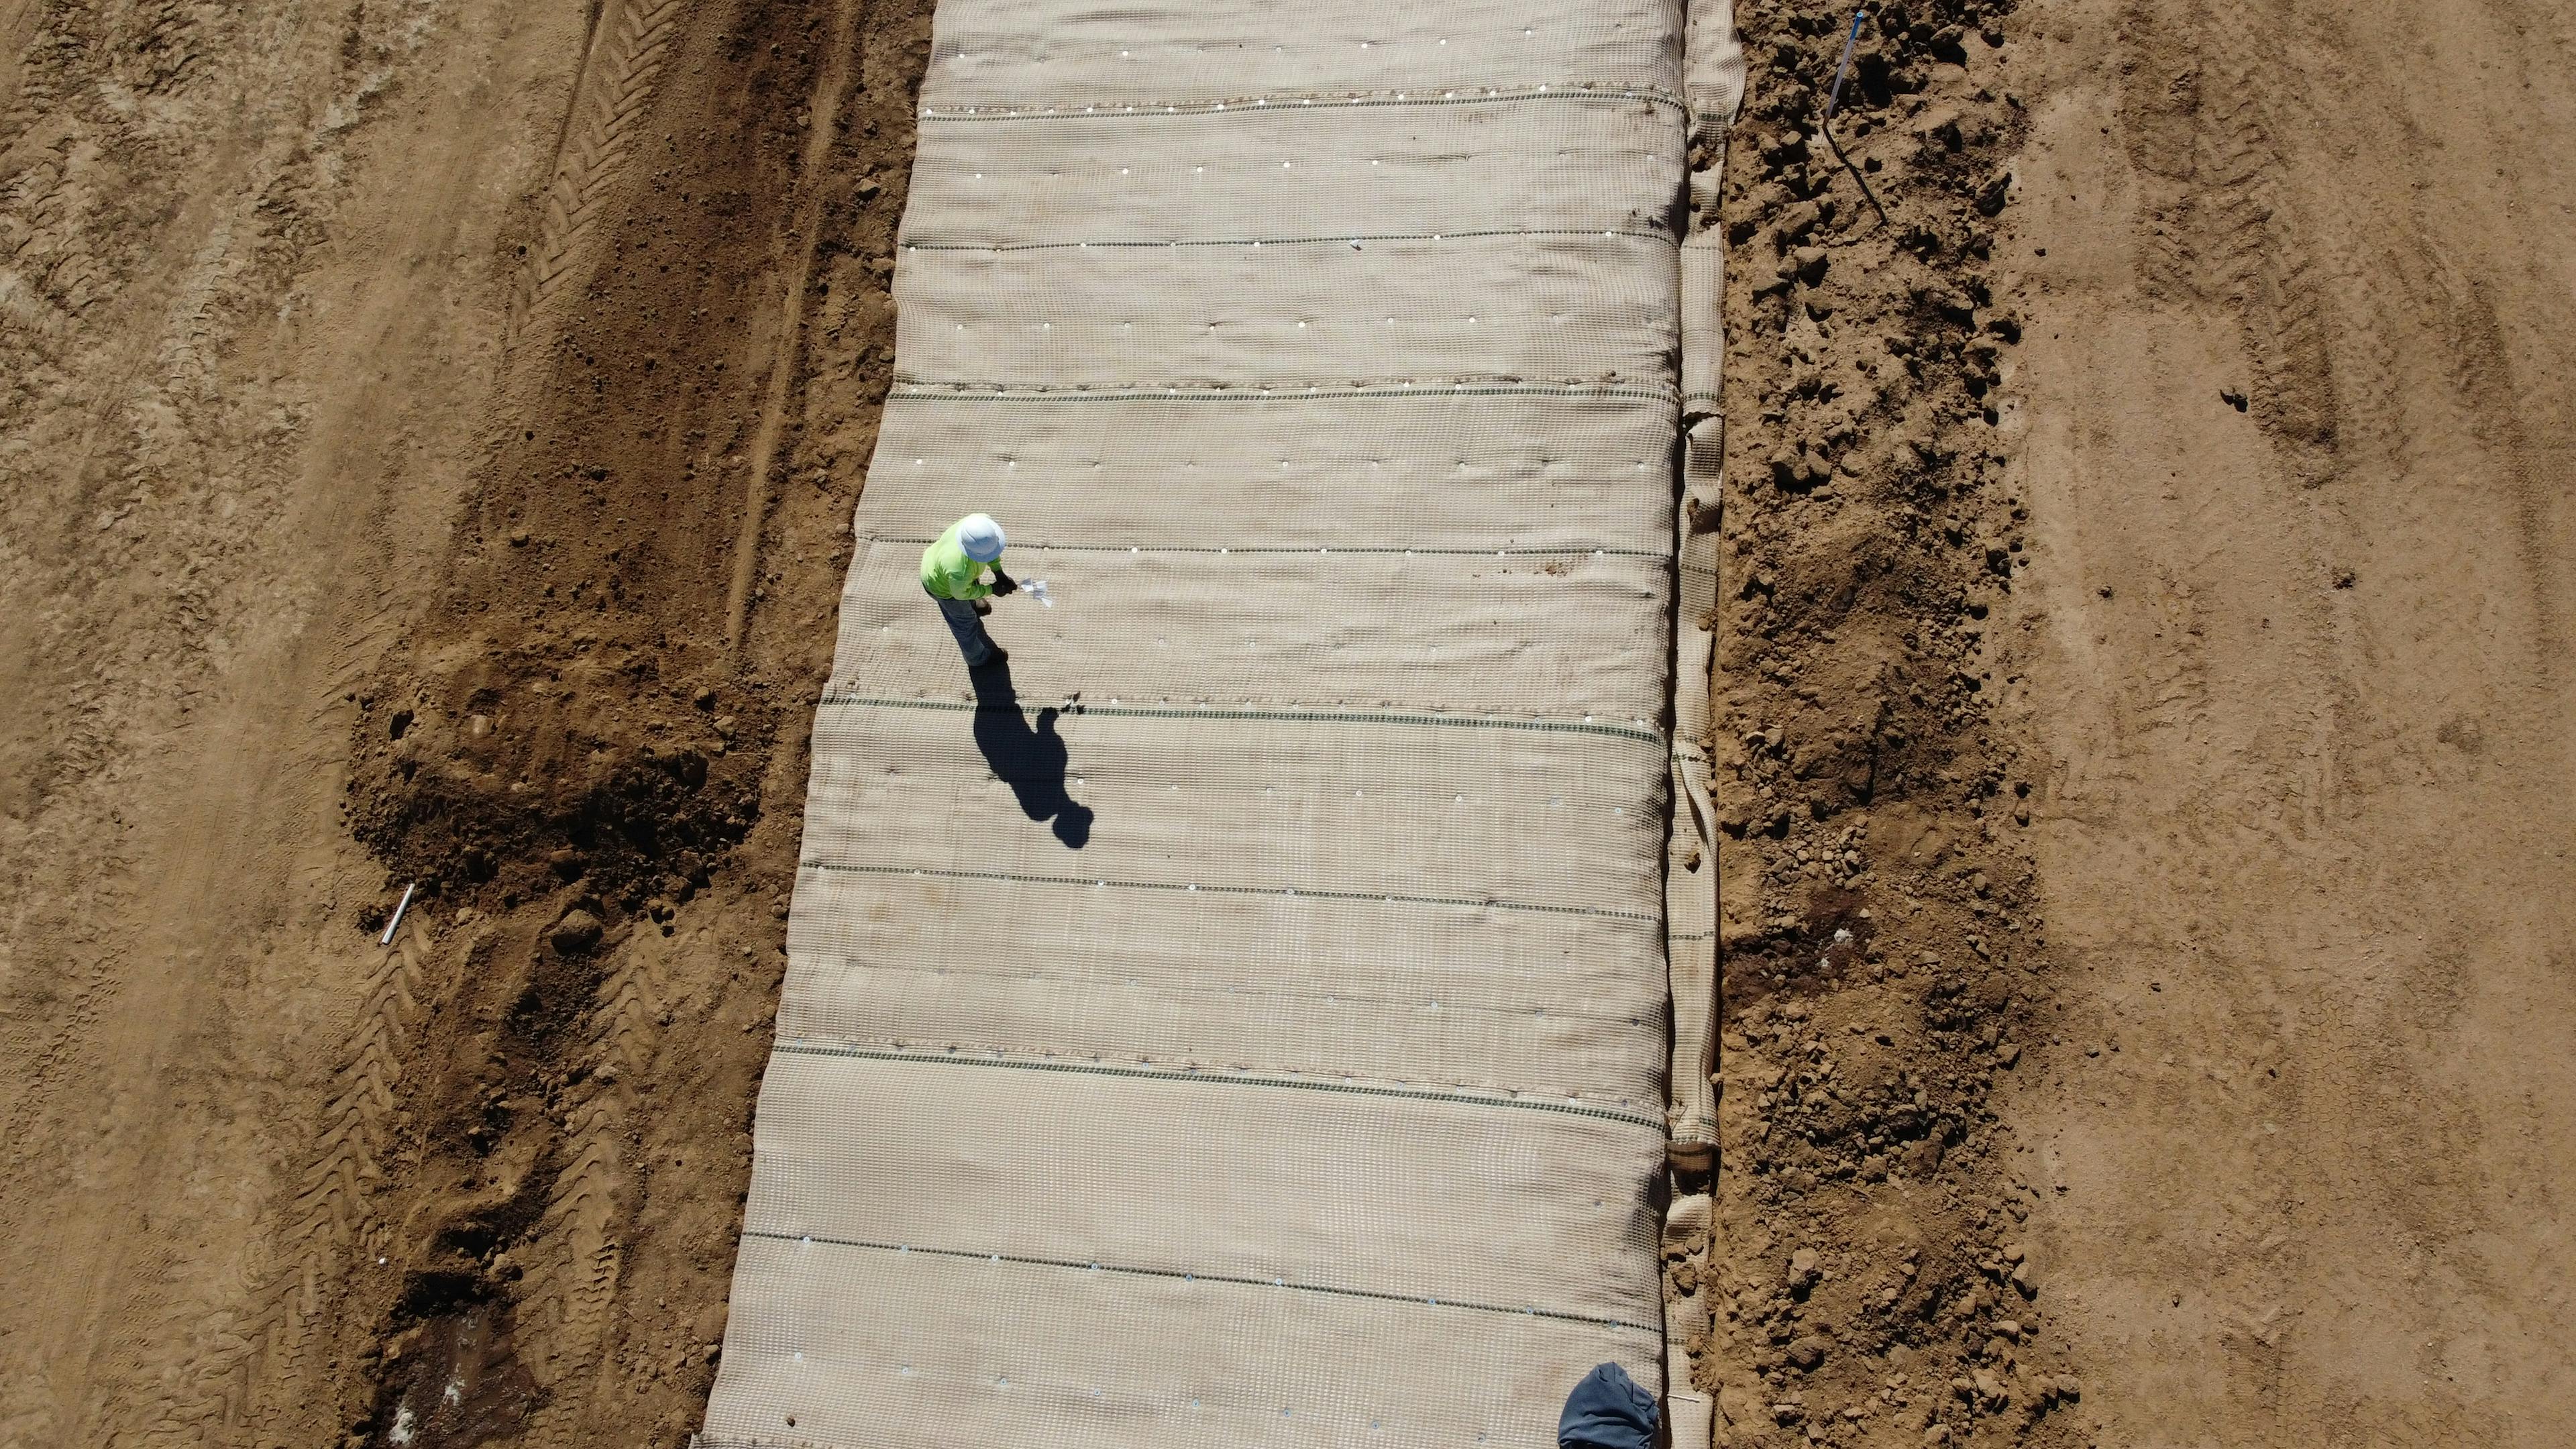 The integration of PROPEX Scourlok® at the slope's base and PROPEX Armormax® above maximizes erosion control in vulnerable areas, ensuring long-term stability and vegetative growth for effective landscape management.